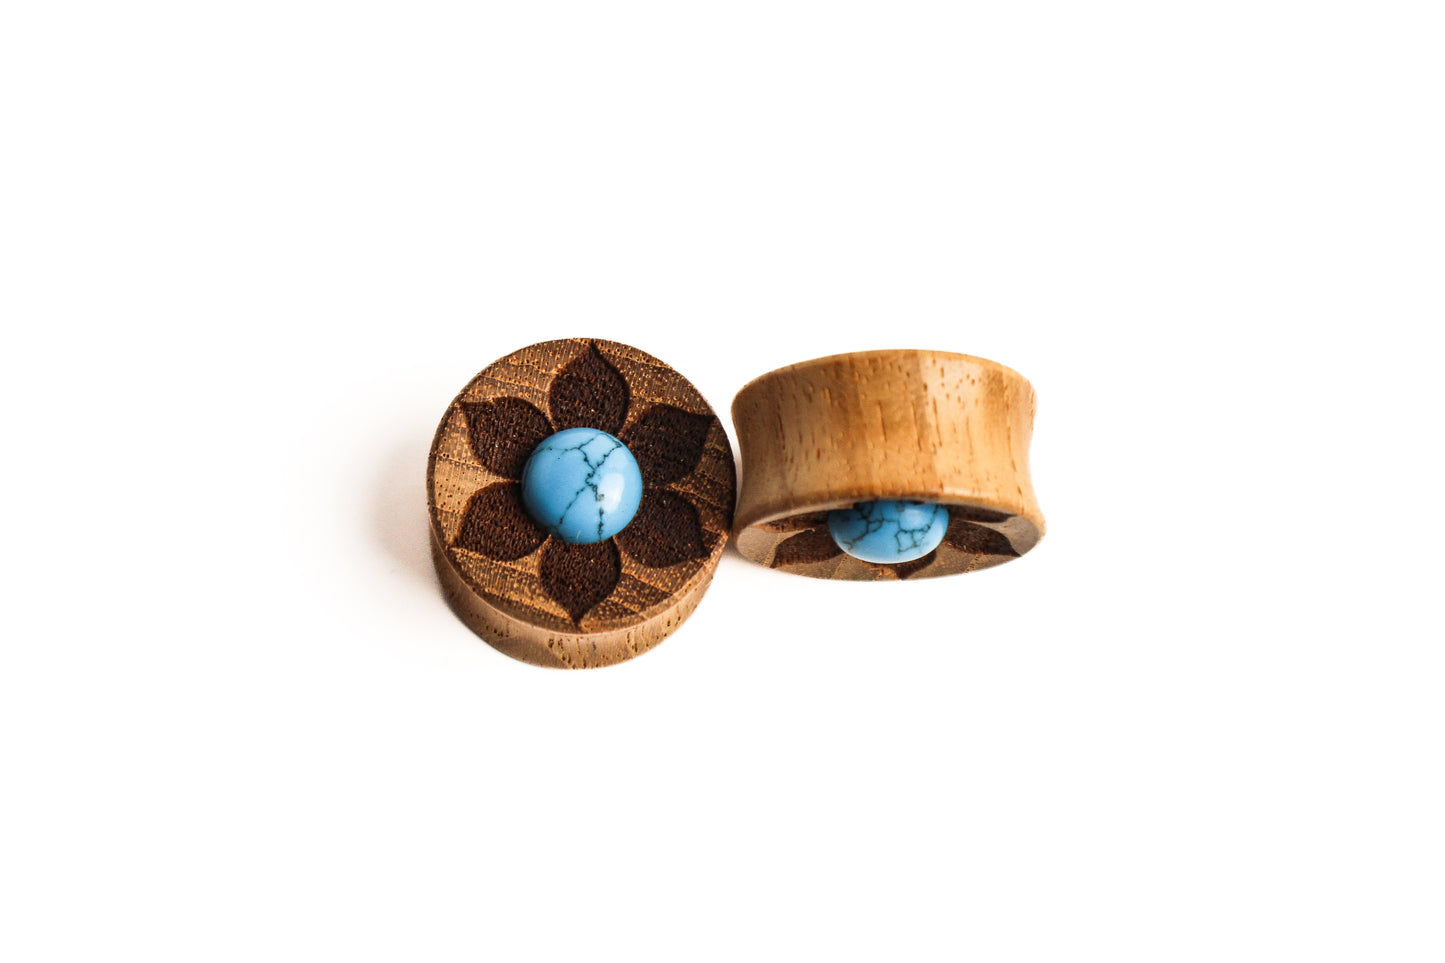 7/8" (22mm) - Flower concave Teak wood plugs with Turquoise inlay